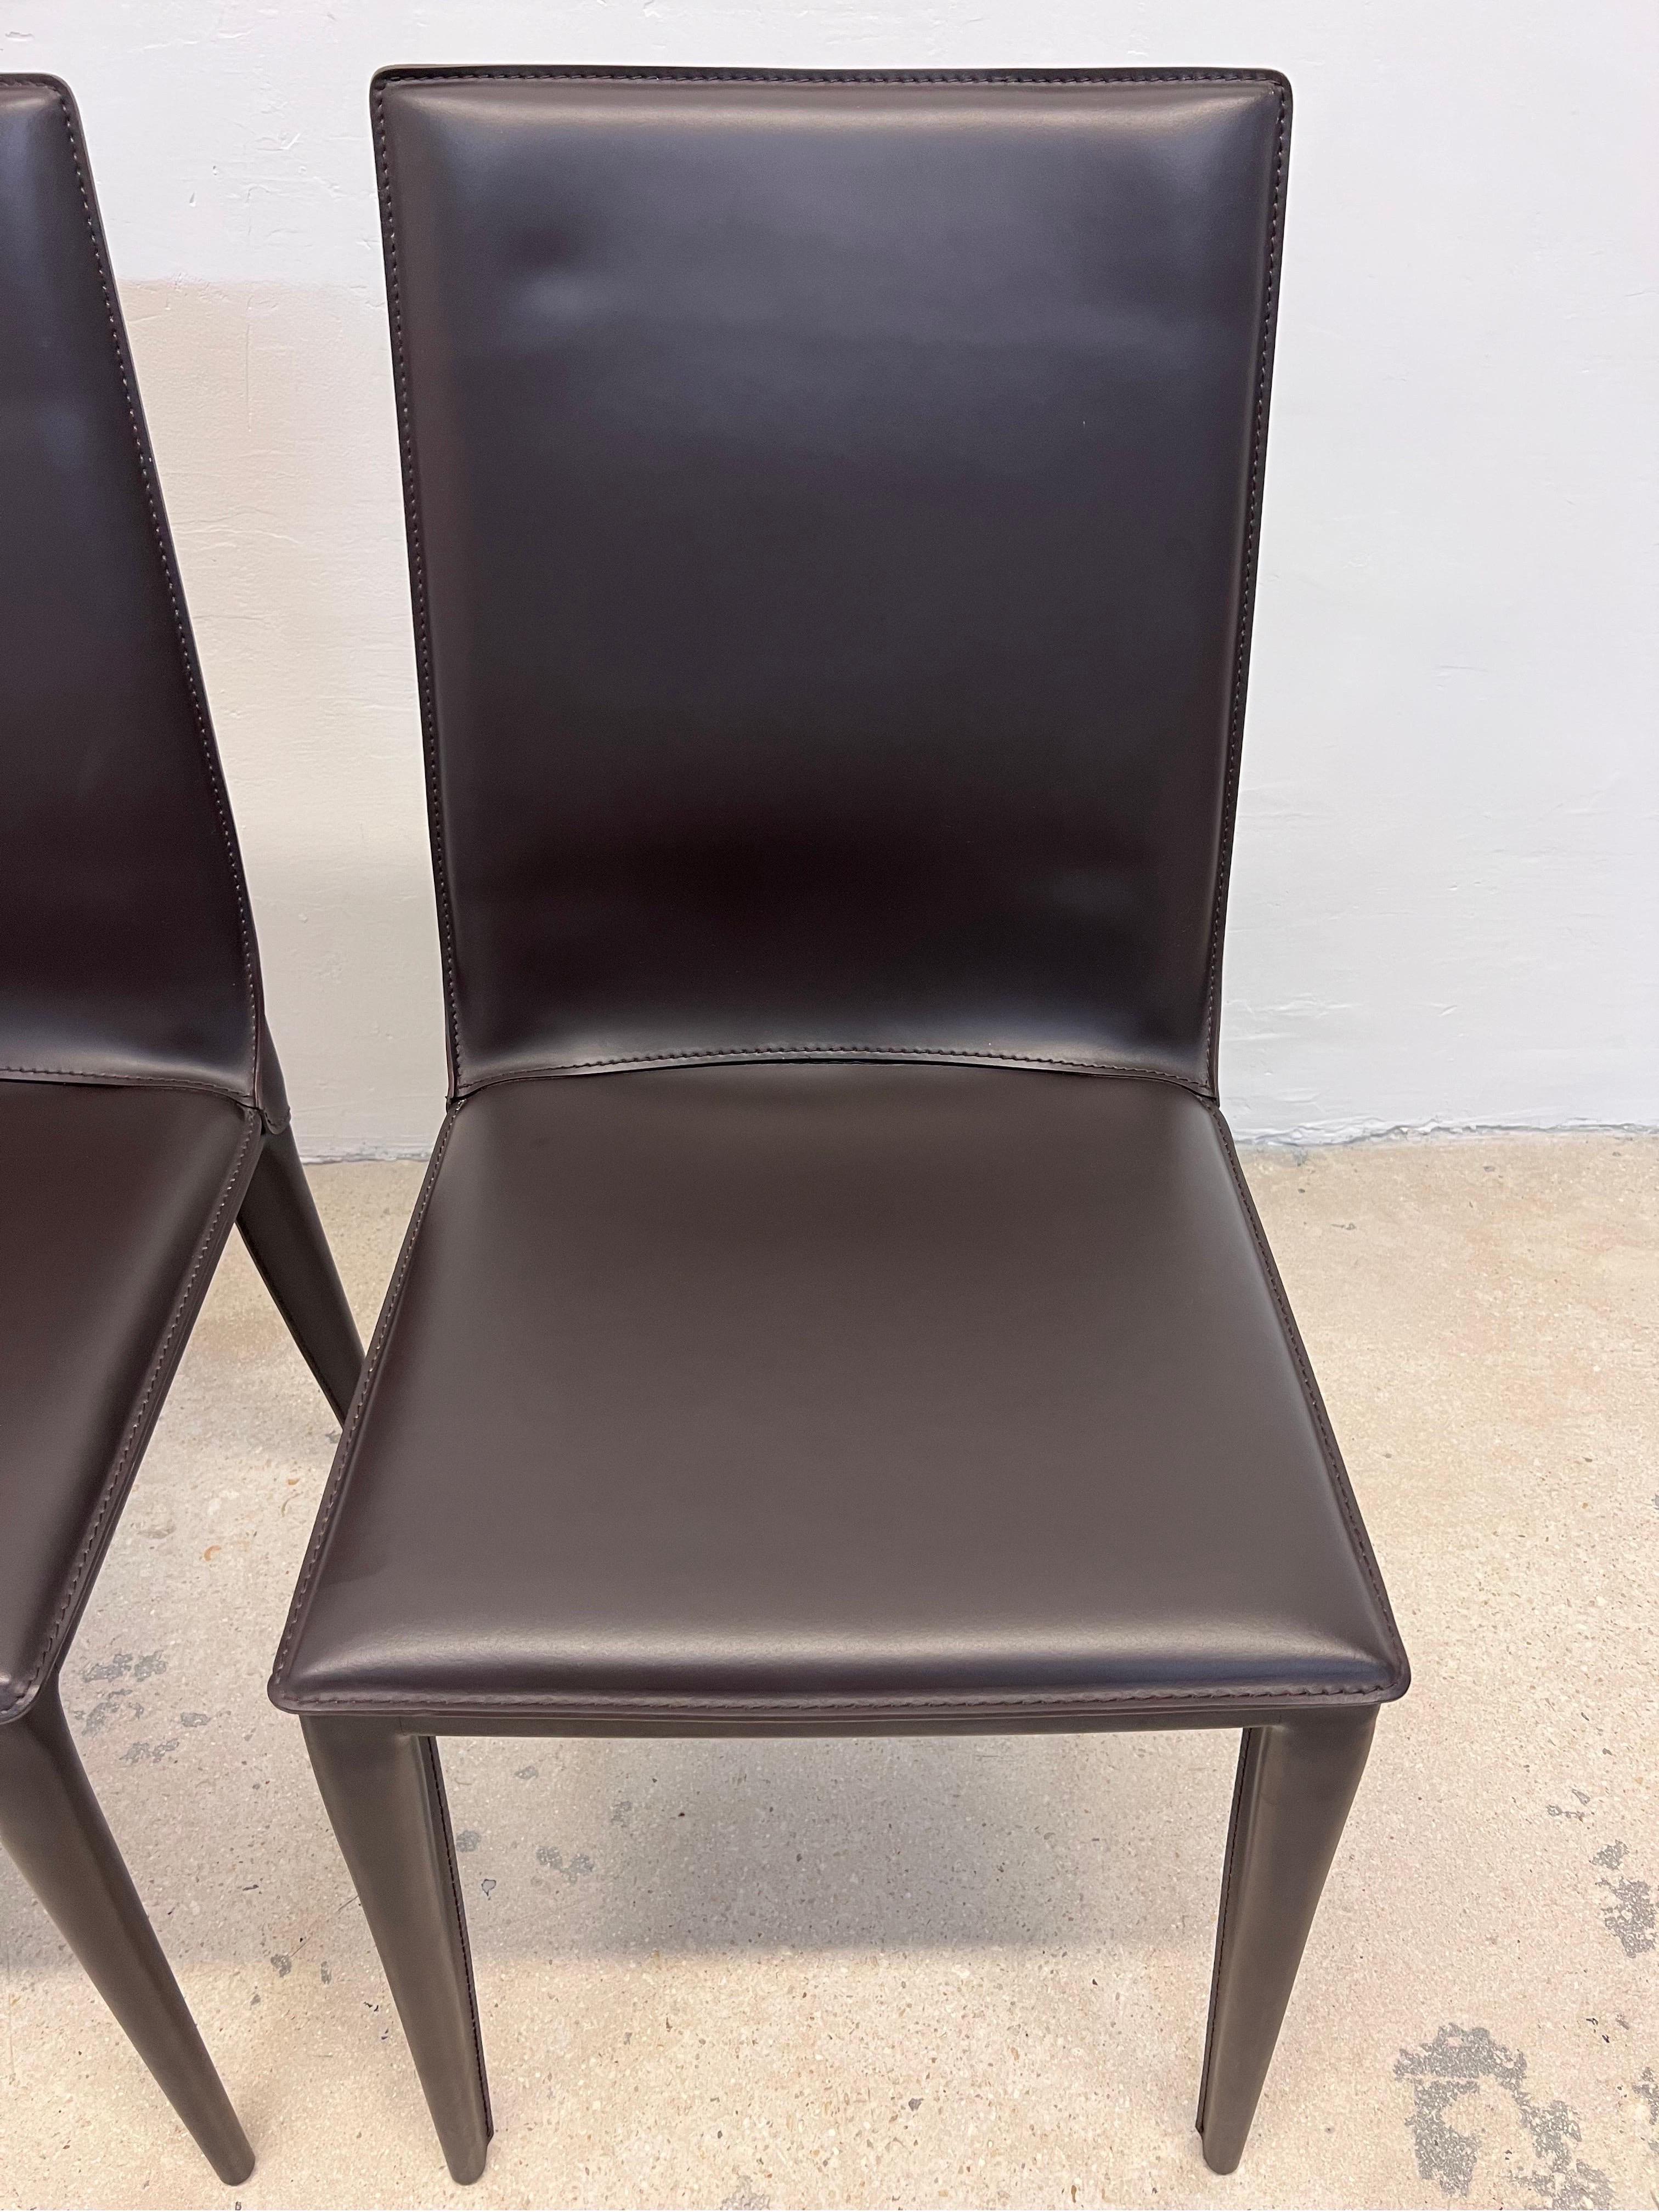 Steel Bottega Leather Dining Chairs by Fauciglietti and Bianchi for DWR, Pair For Sale